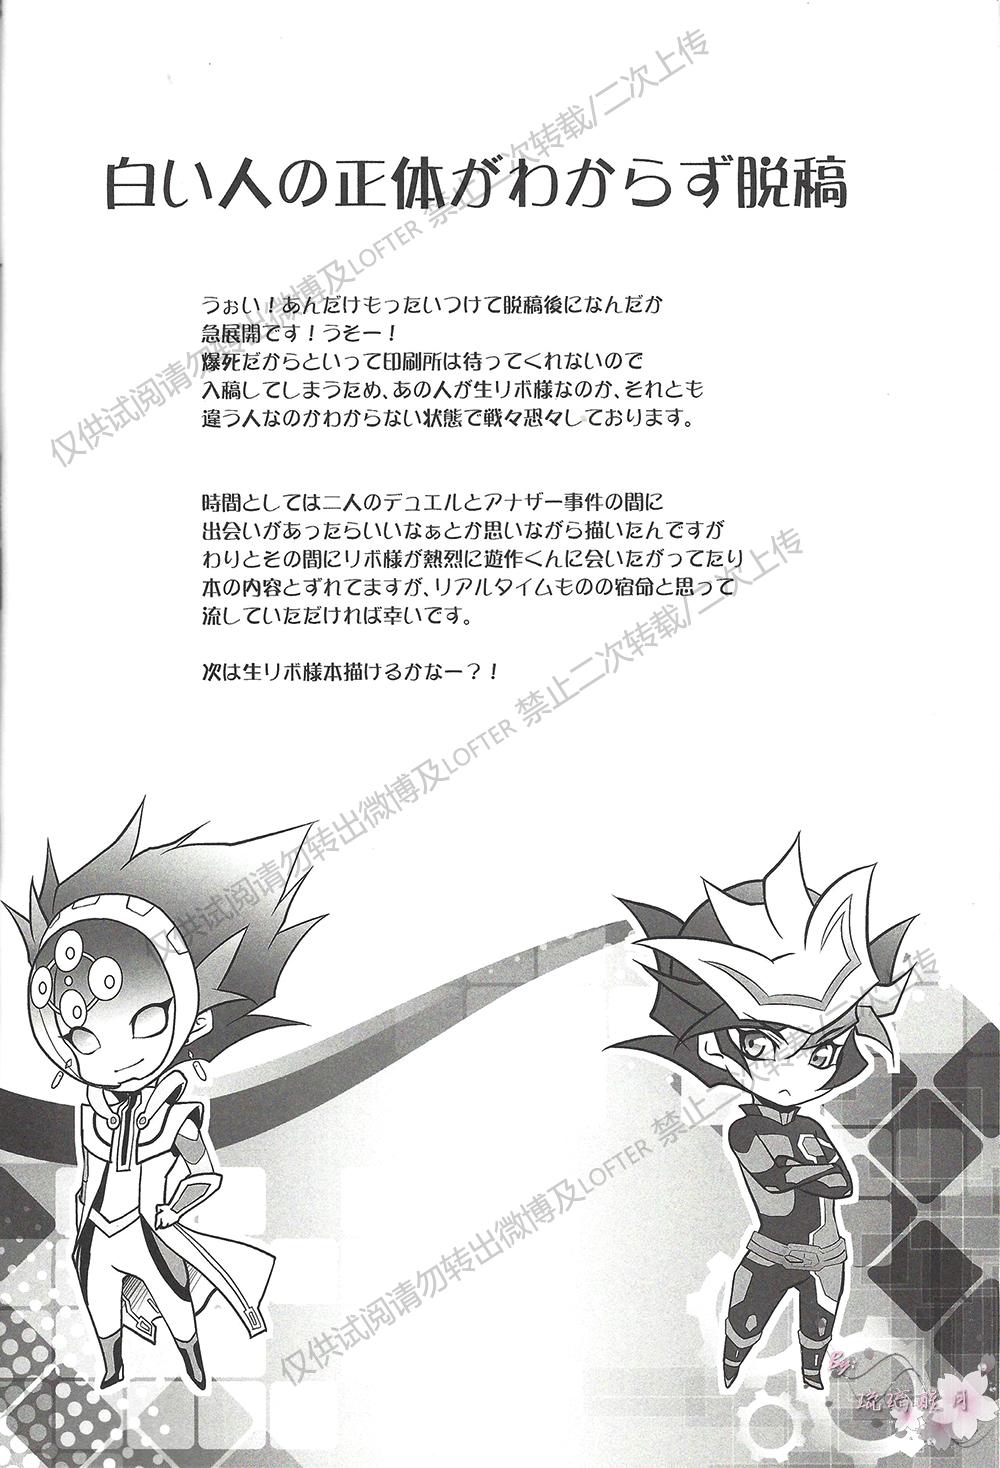 Roleplay BlindGame - Yu-gi-oh vrains Highschool - Page 3